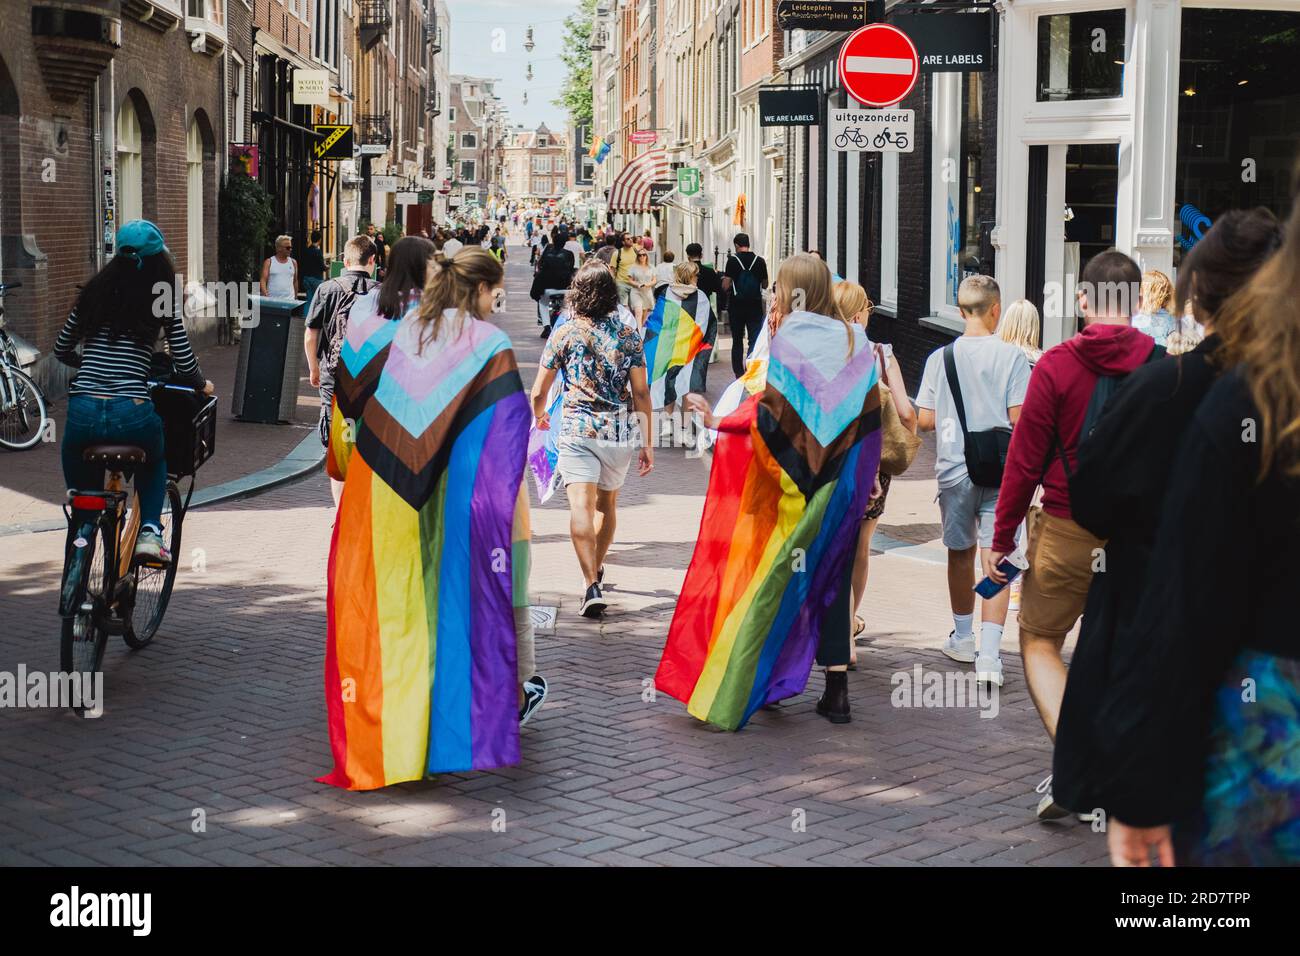 Amsterdam, North Holland, Netherlands – August 6, 2022: A crowd of people including two young girls in New Progress Pride flags walk through streets Stock Photo